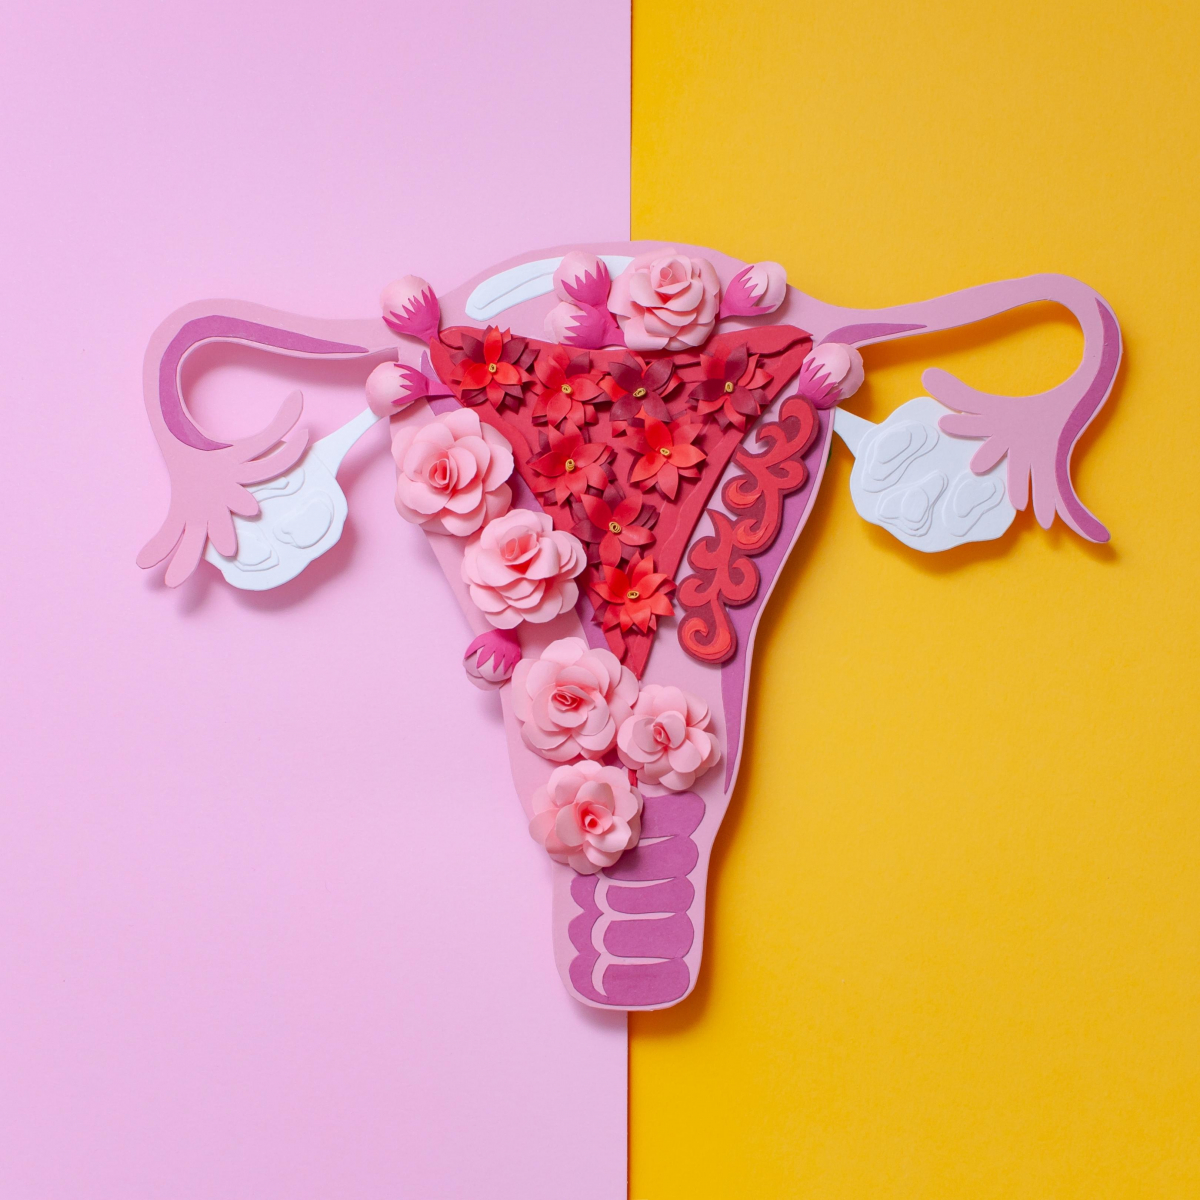 A History of The Uterus